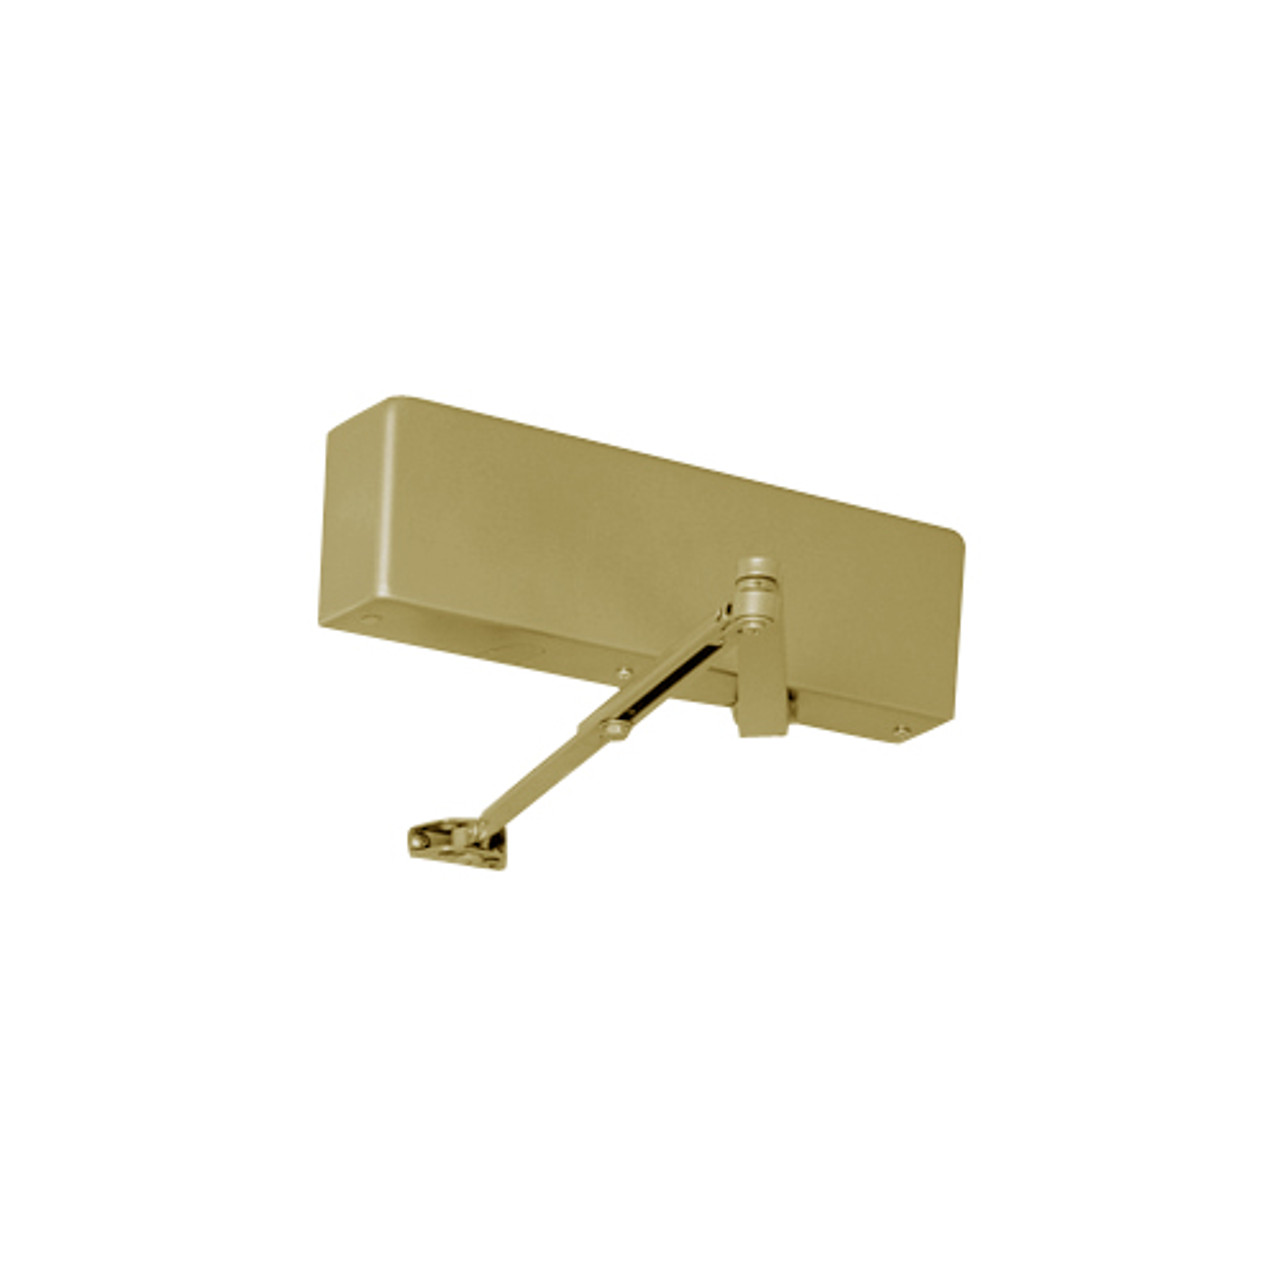 JS7500DA-696 Norton 7500 Series Non-Hold Open Institutional Door Closer with Top Jamb Application 3 inch Maximum Reveal in Gold Finish